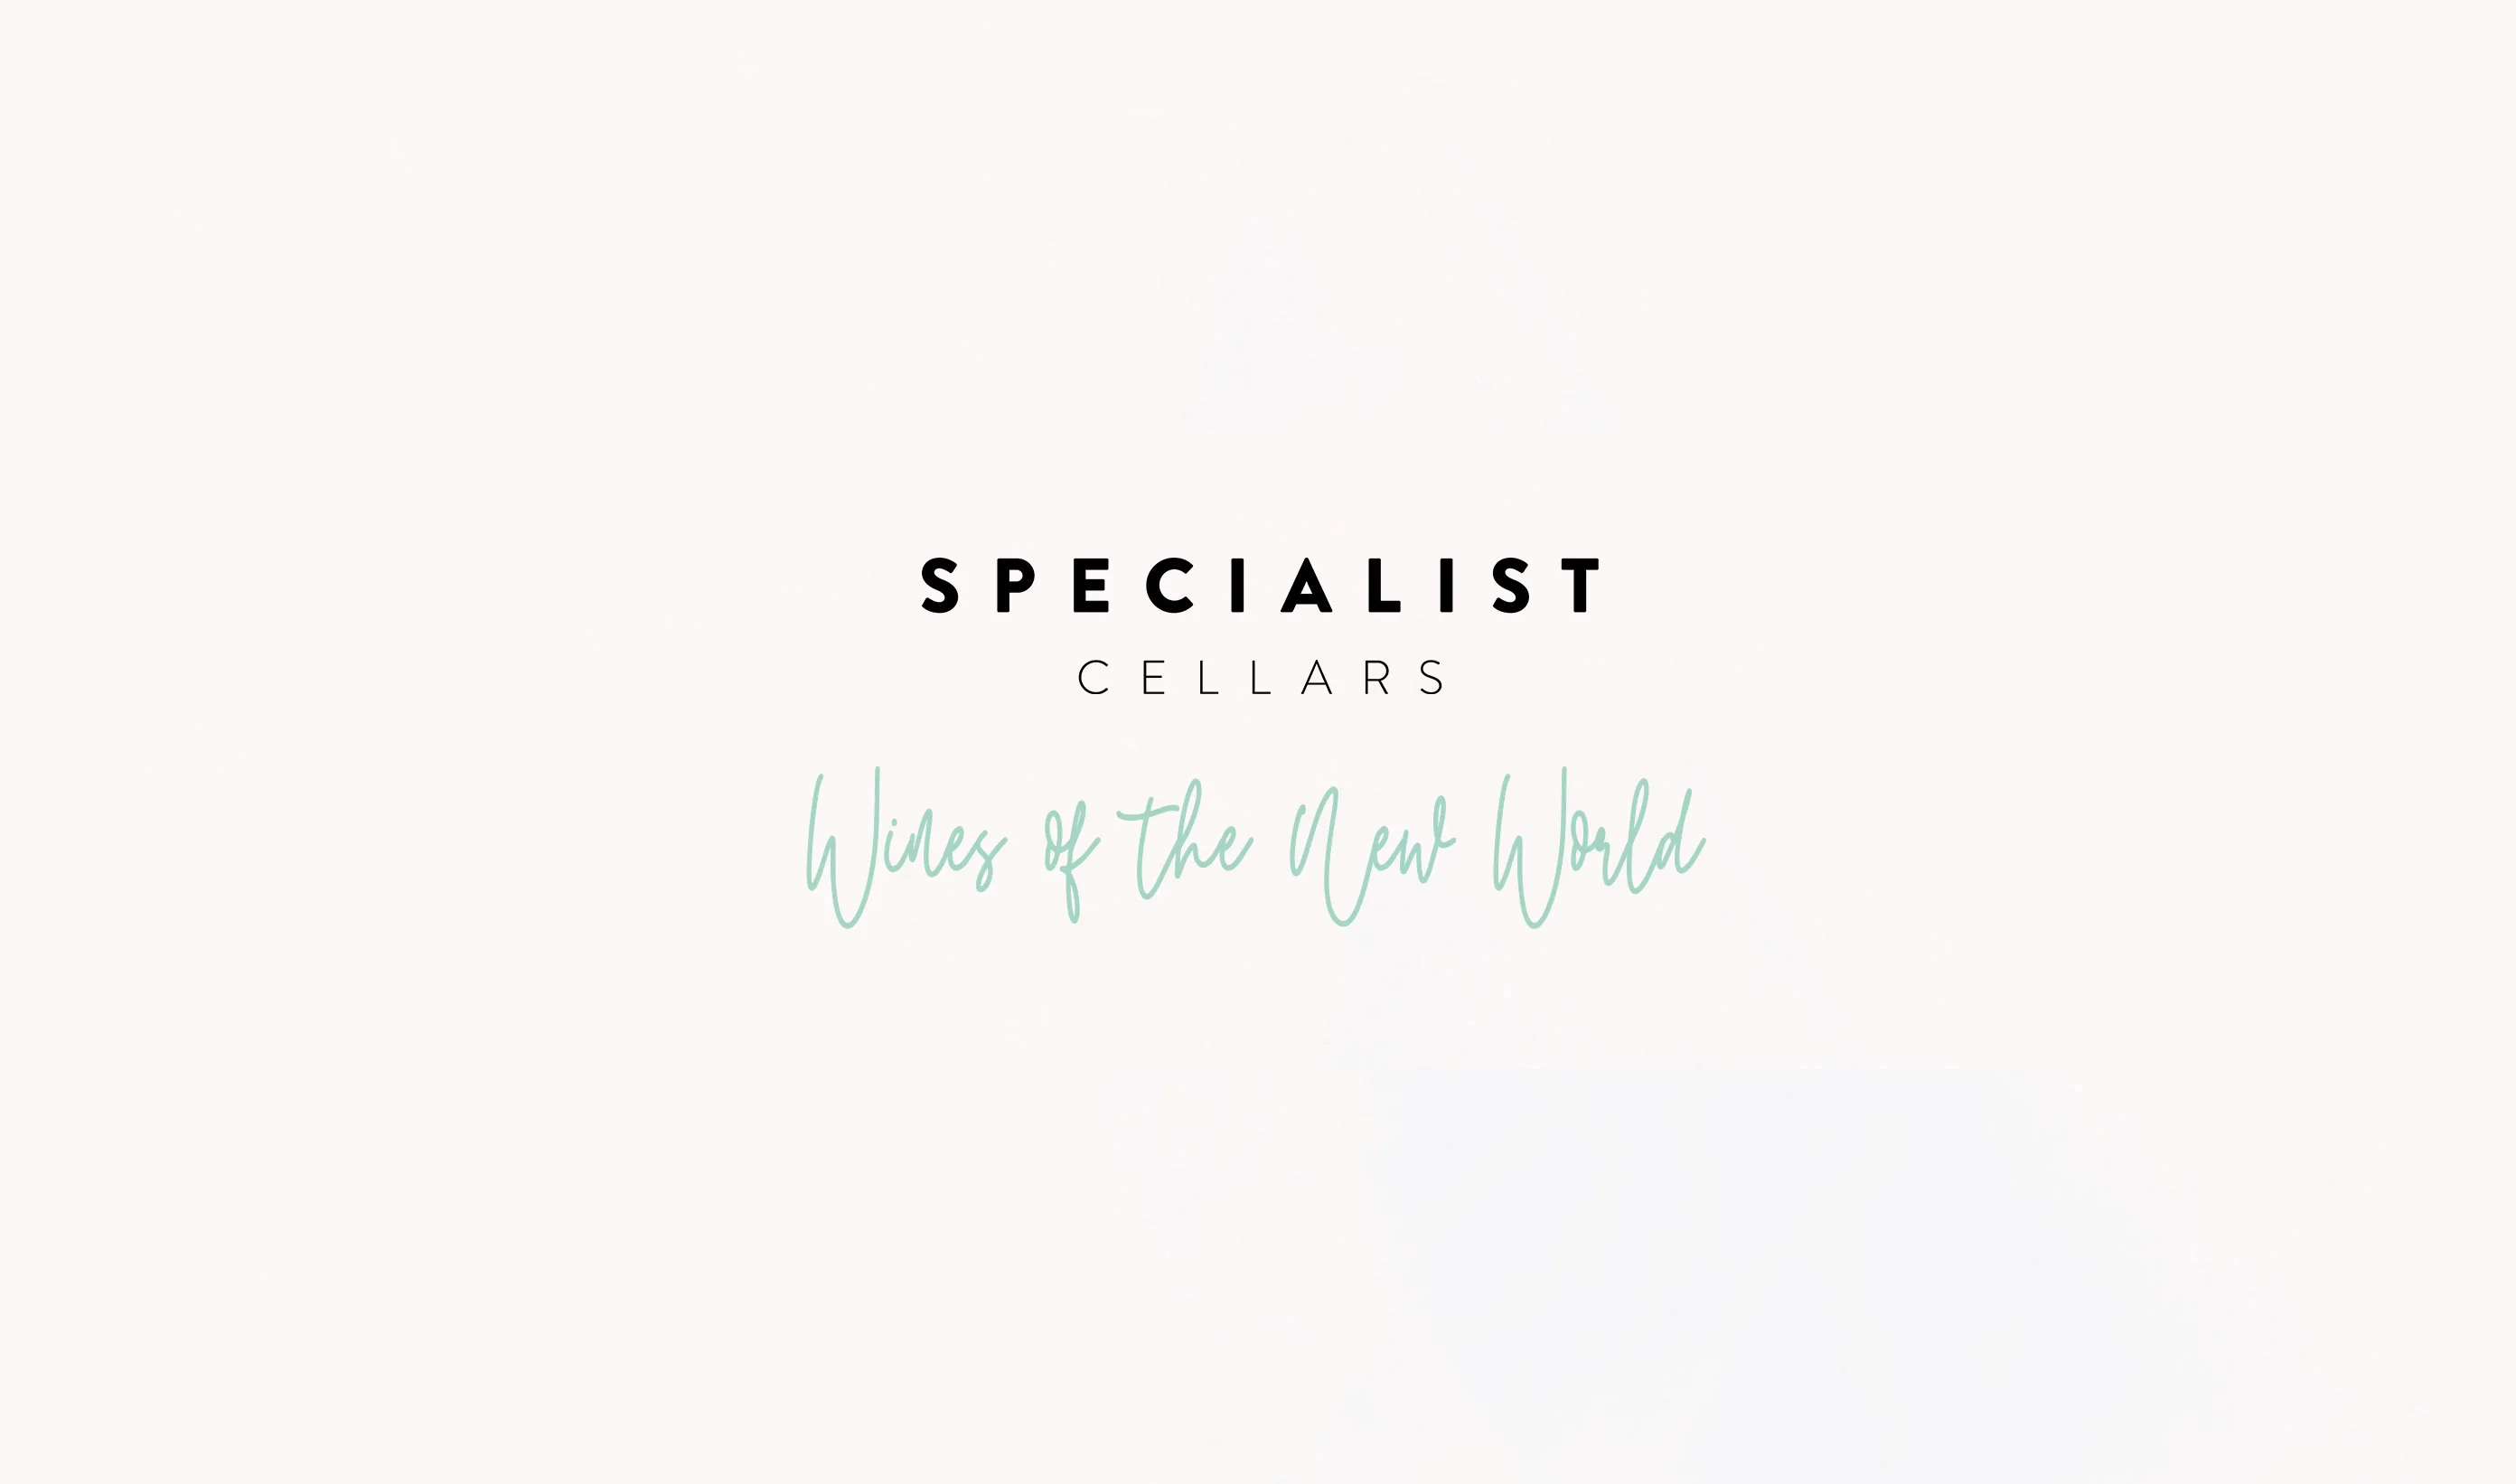 the Specialis Cellars logotype in black with their strapline Wines of the New World in green underneath